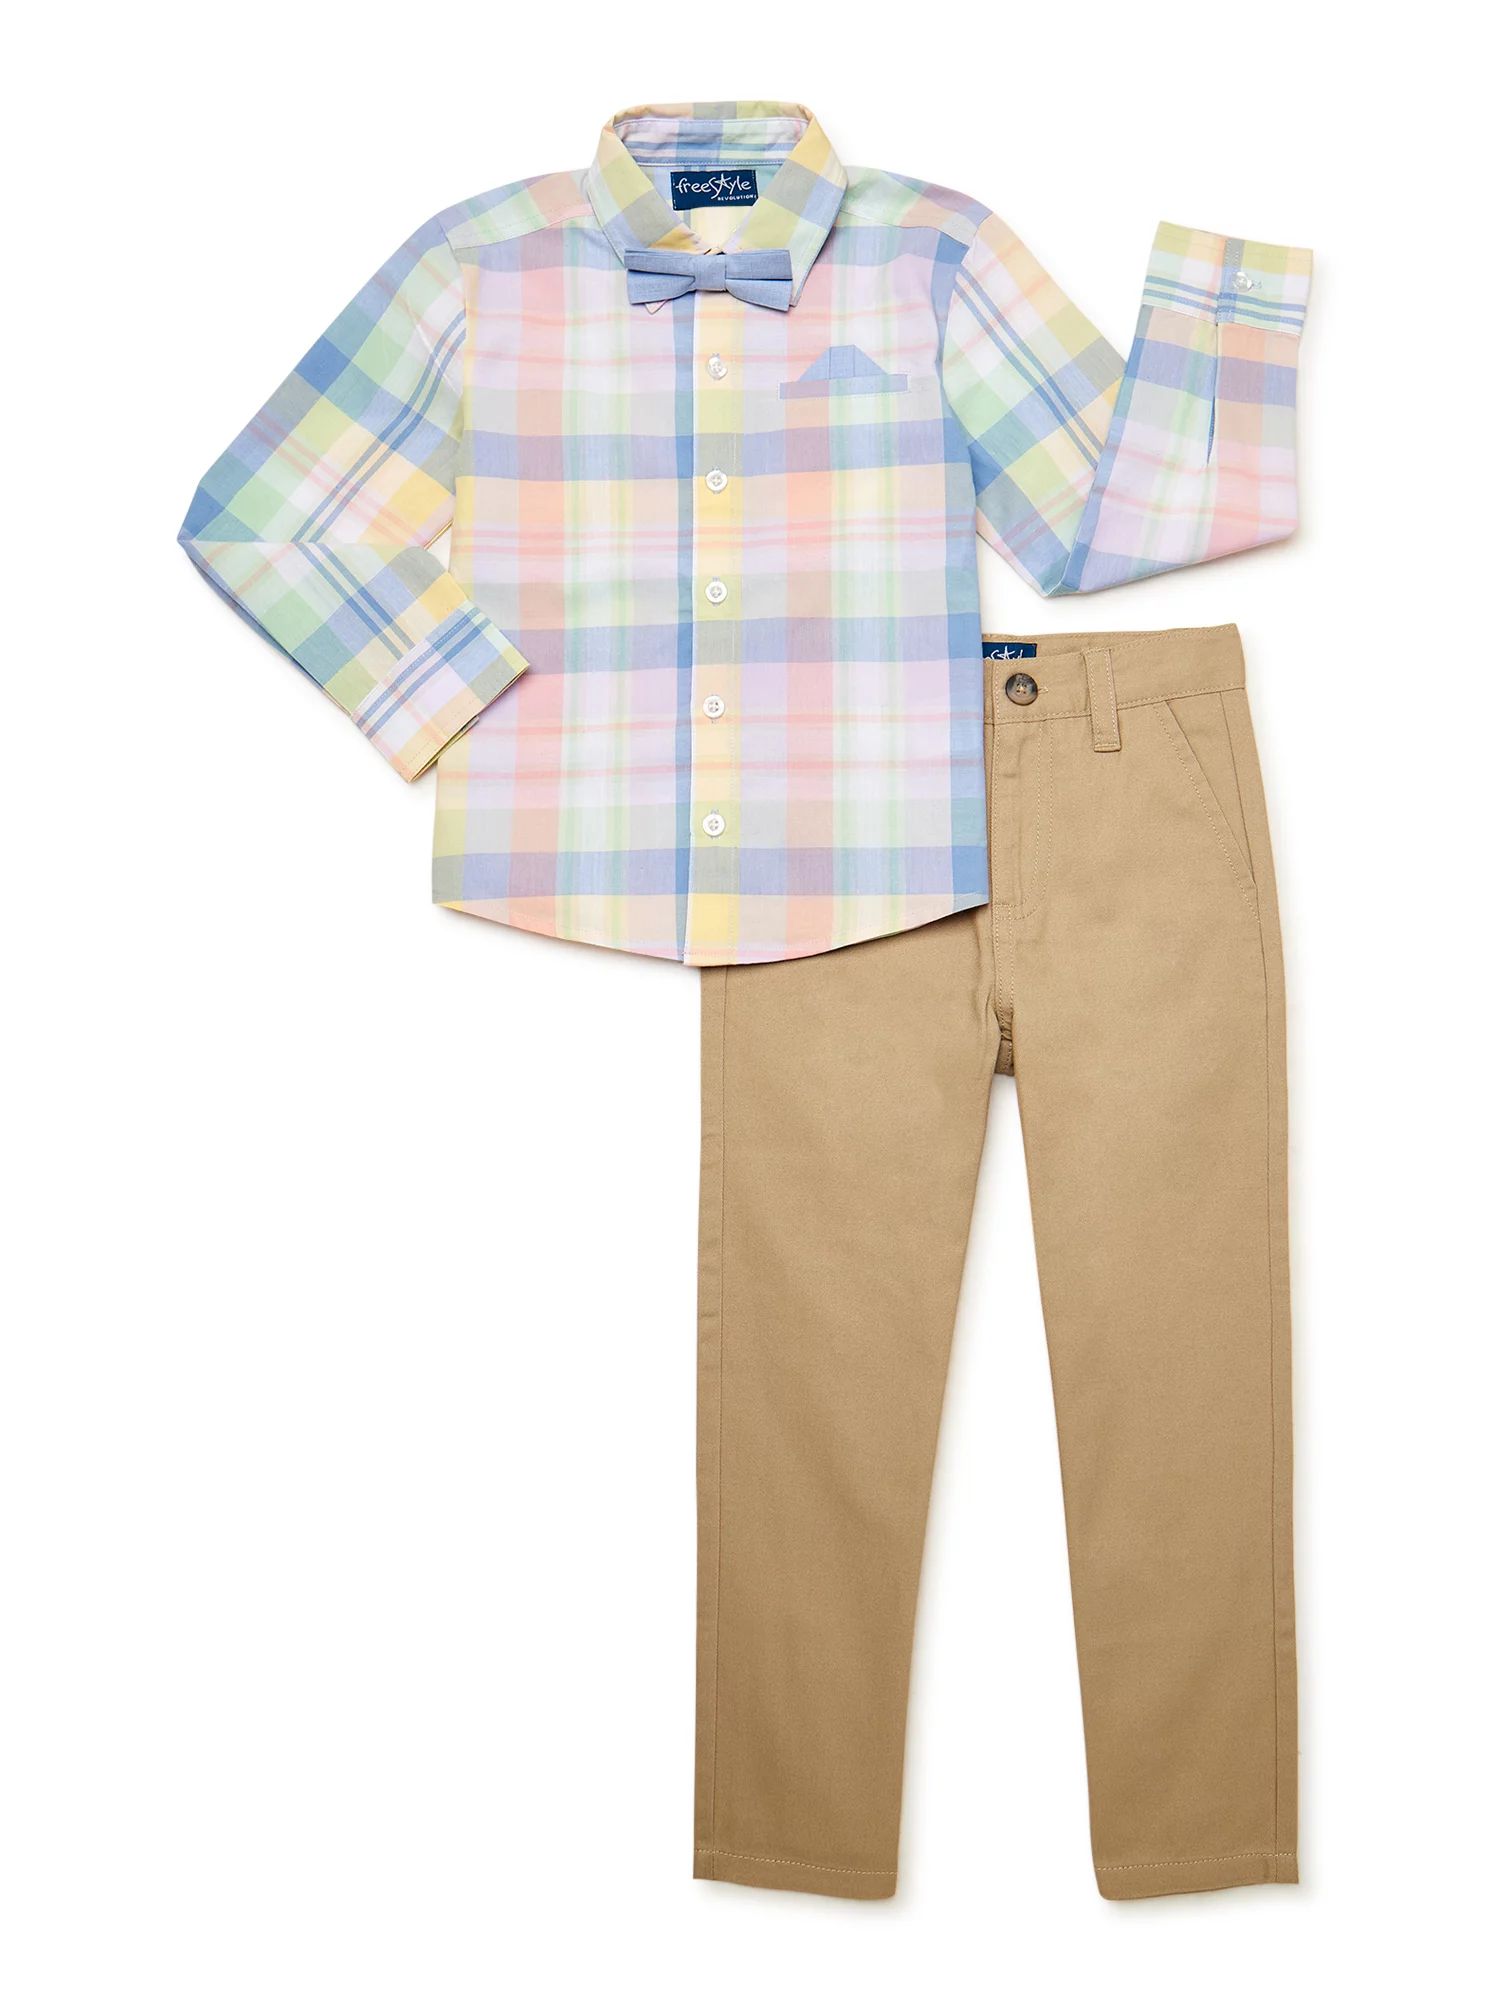 Freestyle Revolution Boys Dress Shirt and Pants with Tie Outfit Set, 3-Piece, Sizes 4-14 | Walmart (US)